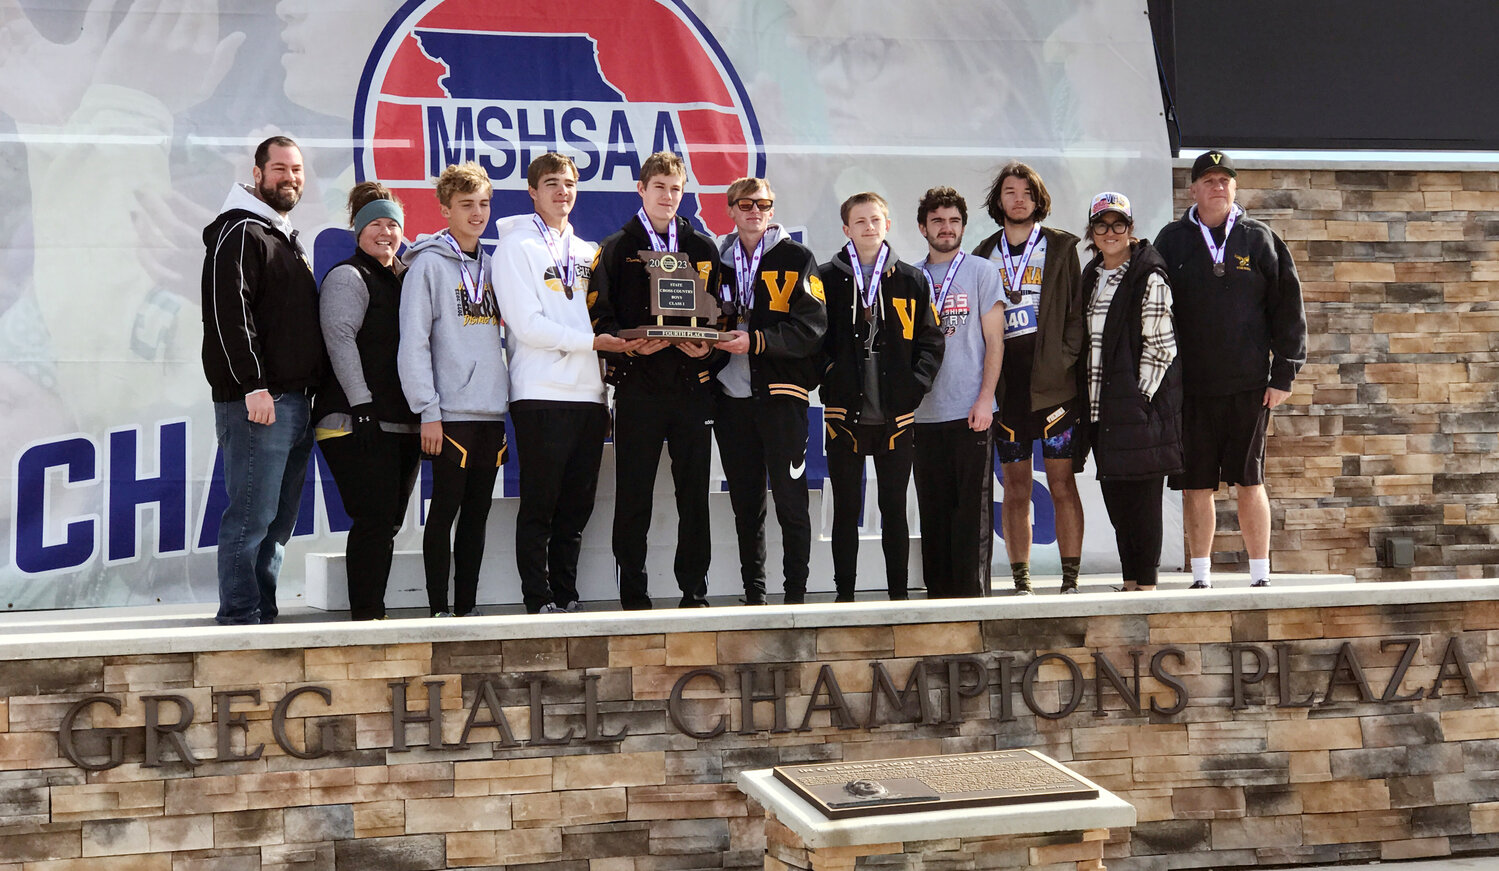 VIENNA EAGLE cross country team members and coaches proudly stand on the podium with their fourth-place trophy from the MSHSAA Cross Country Championships Friday in Columbia.